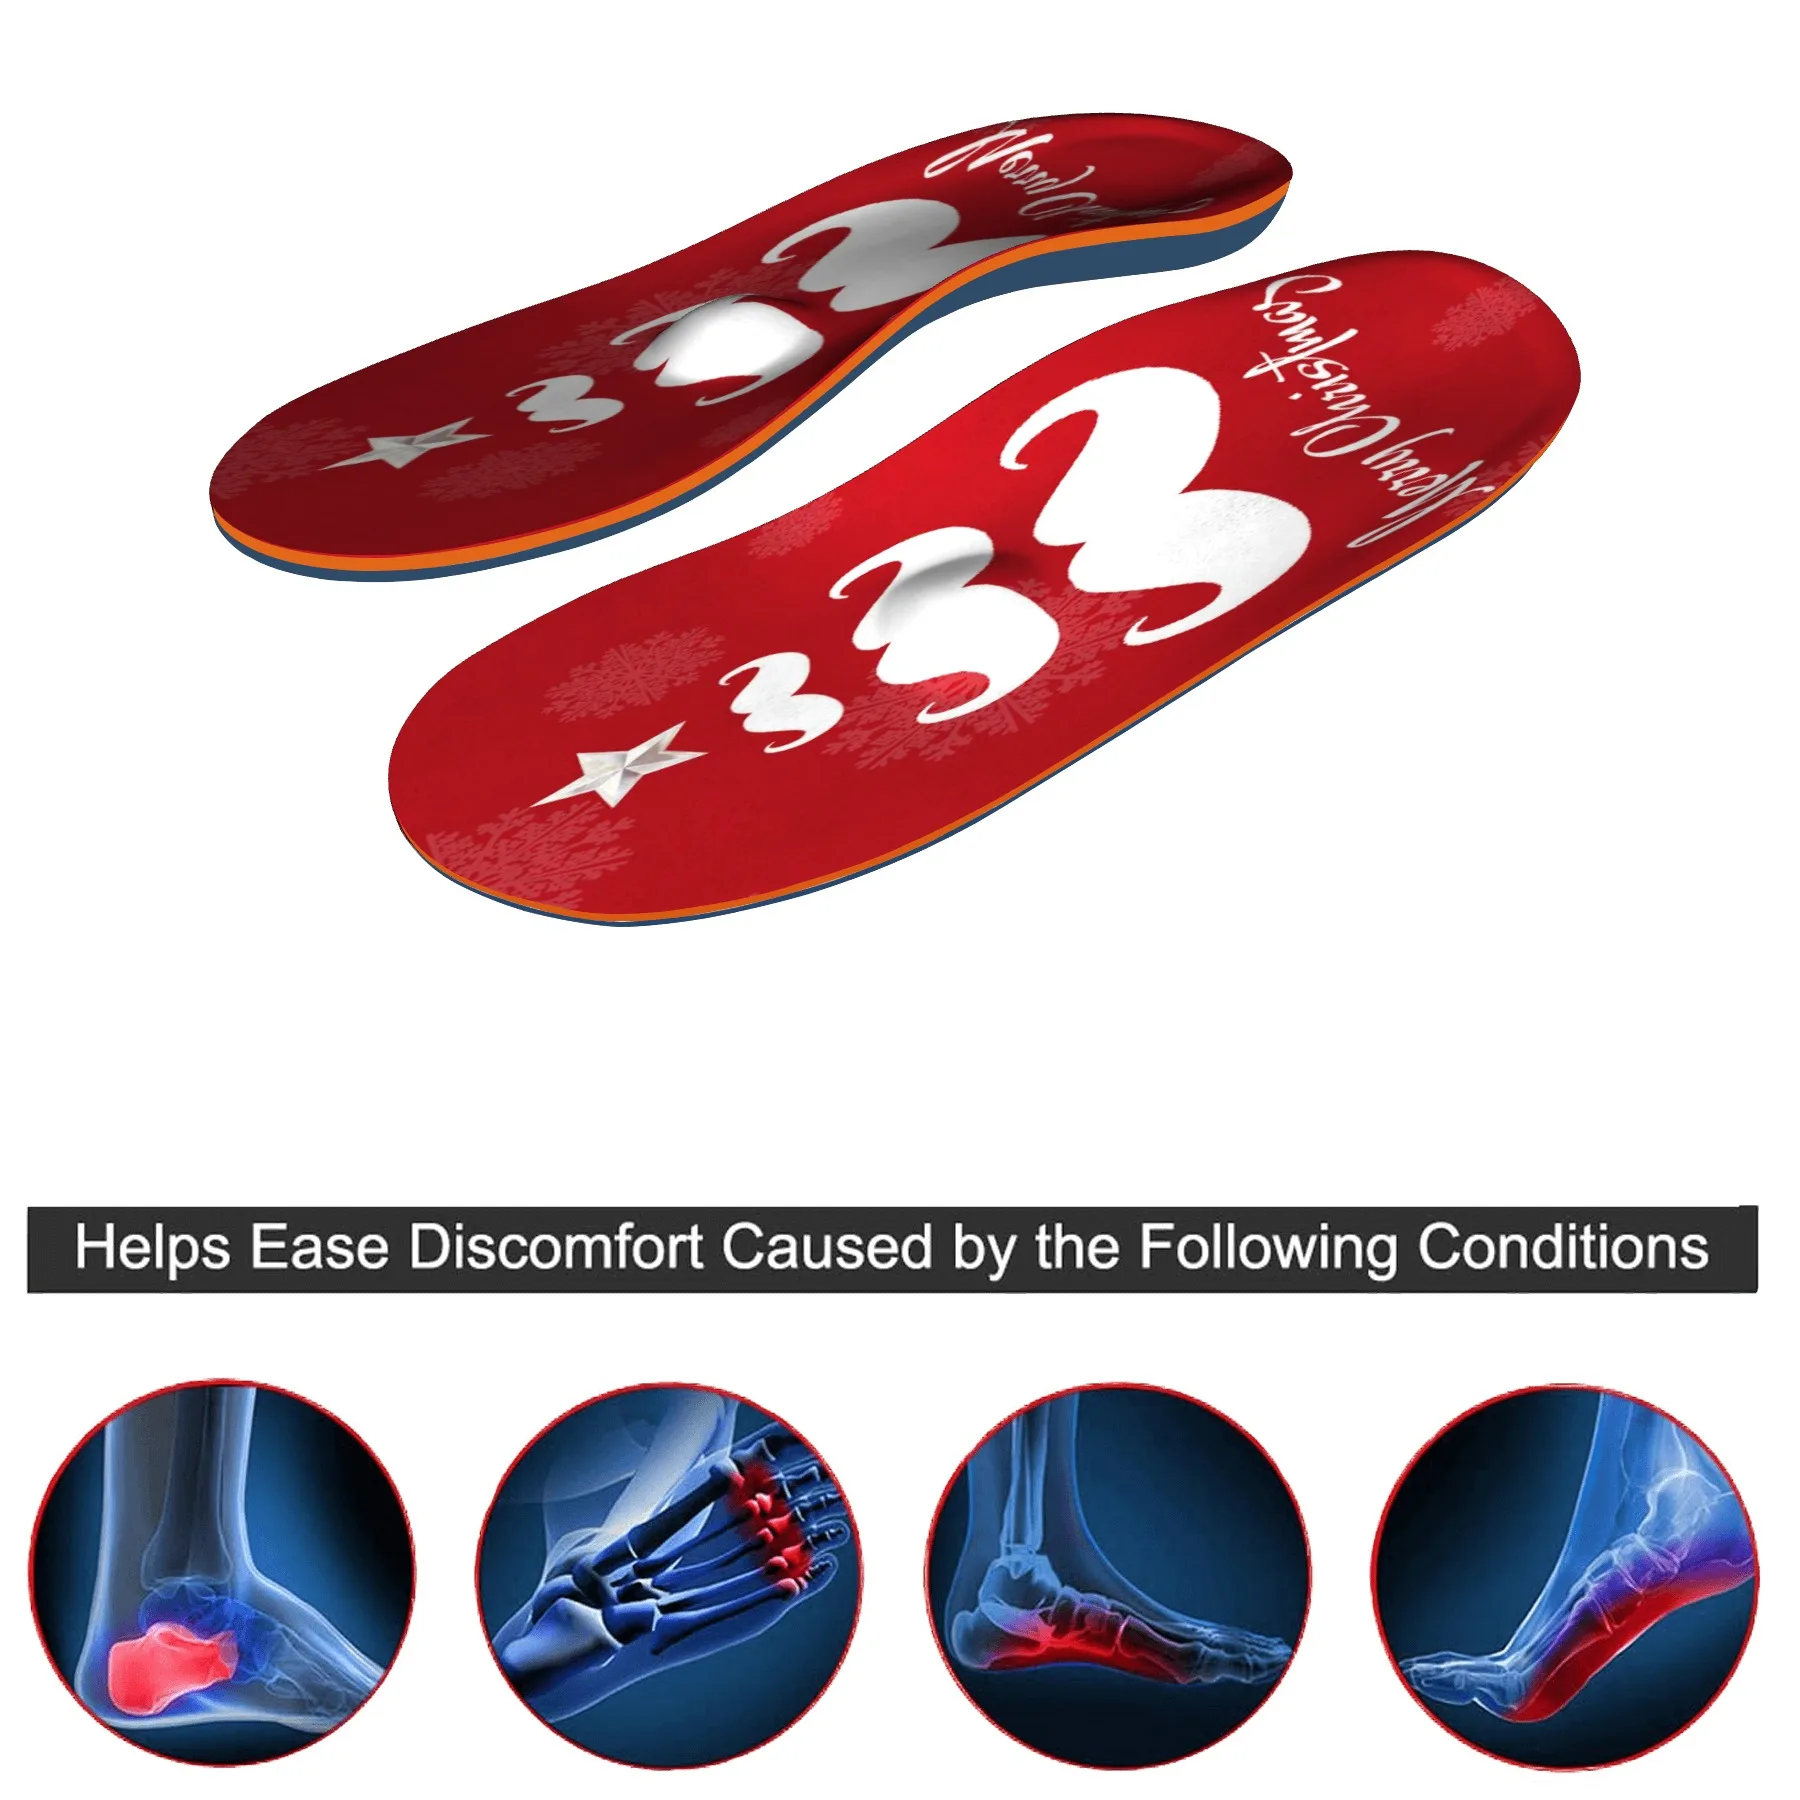 Plantar Fasciitis Orthopedic Insoles Template Arch Support Flat Feet Heel Pain Men Cushion Orthotics Sole Sneakers Shoes Inserts